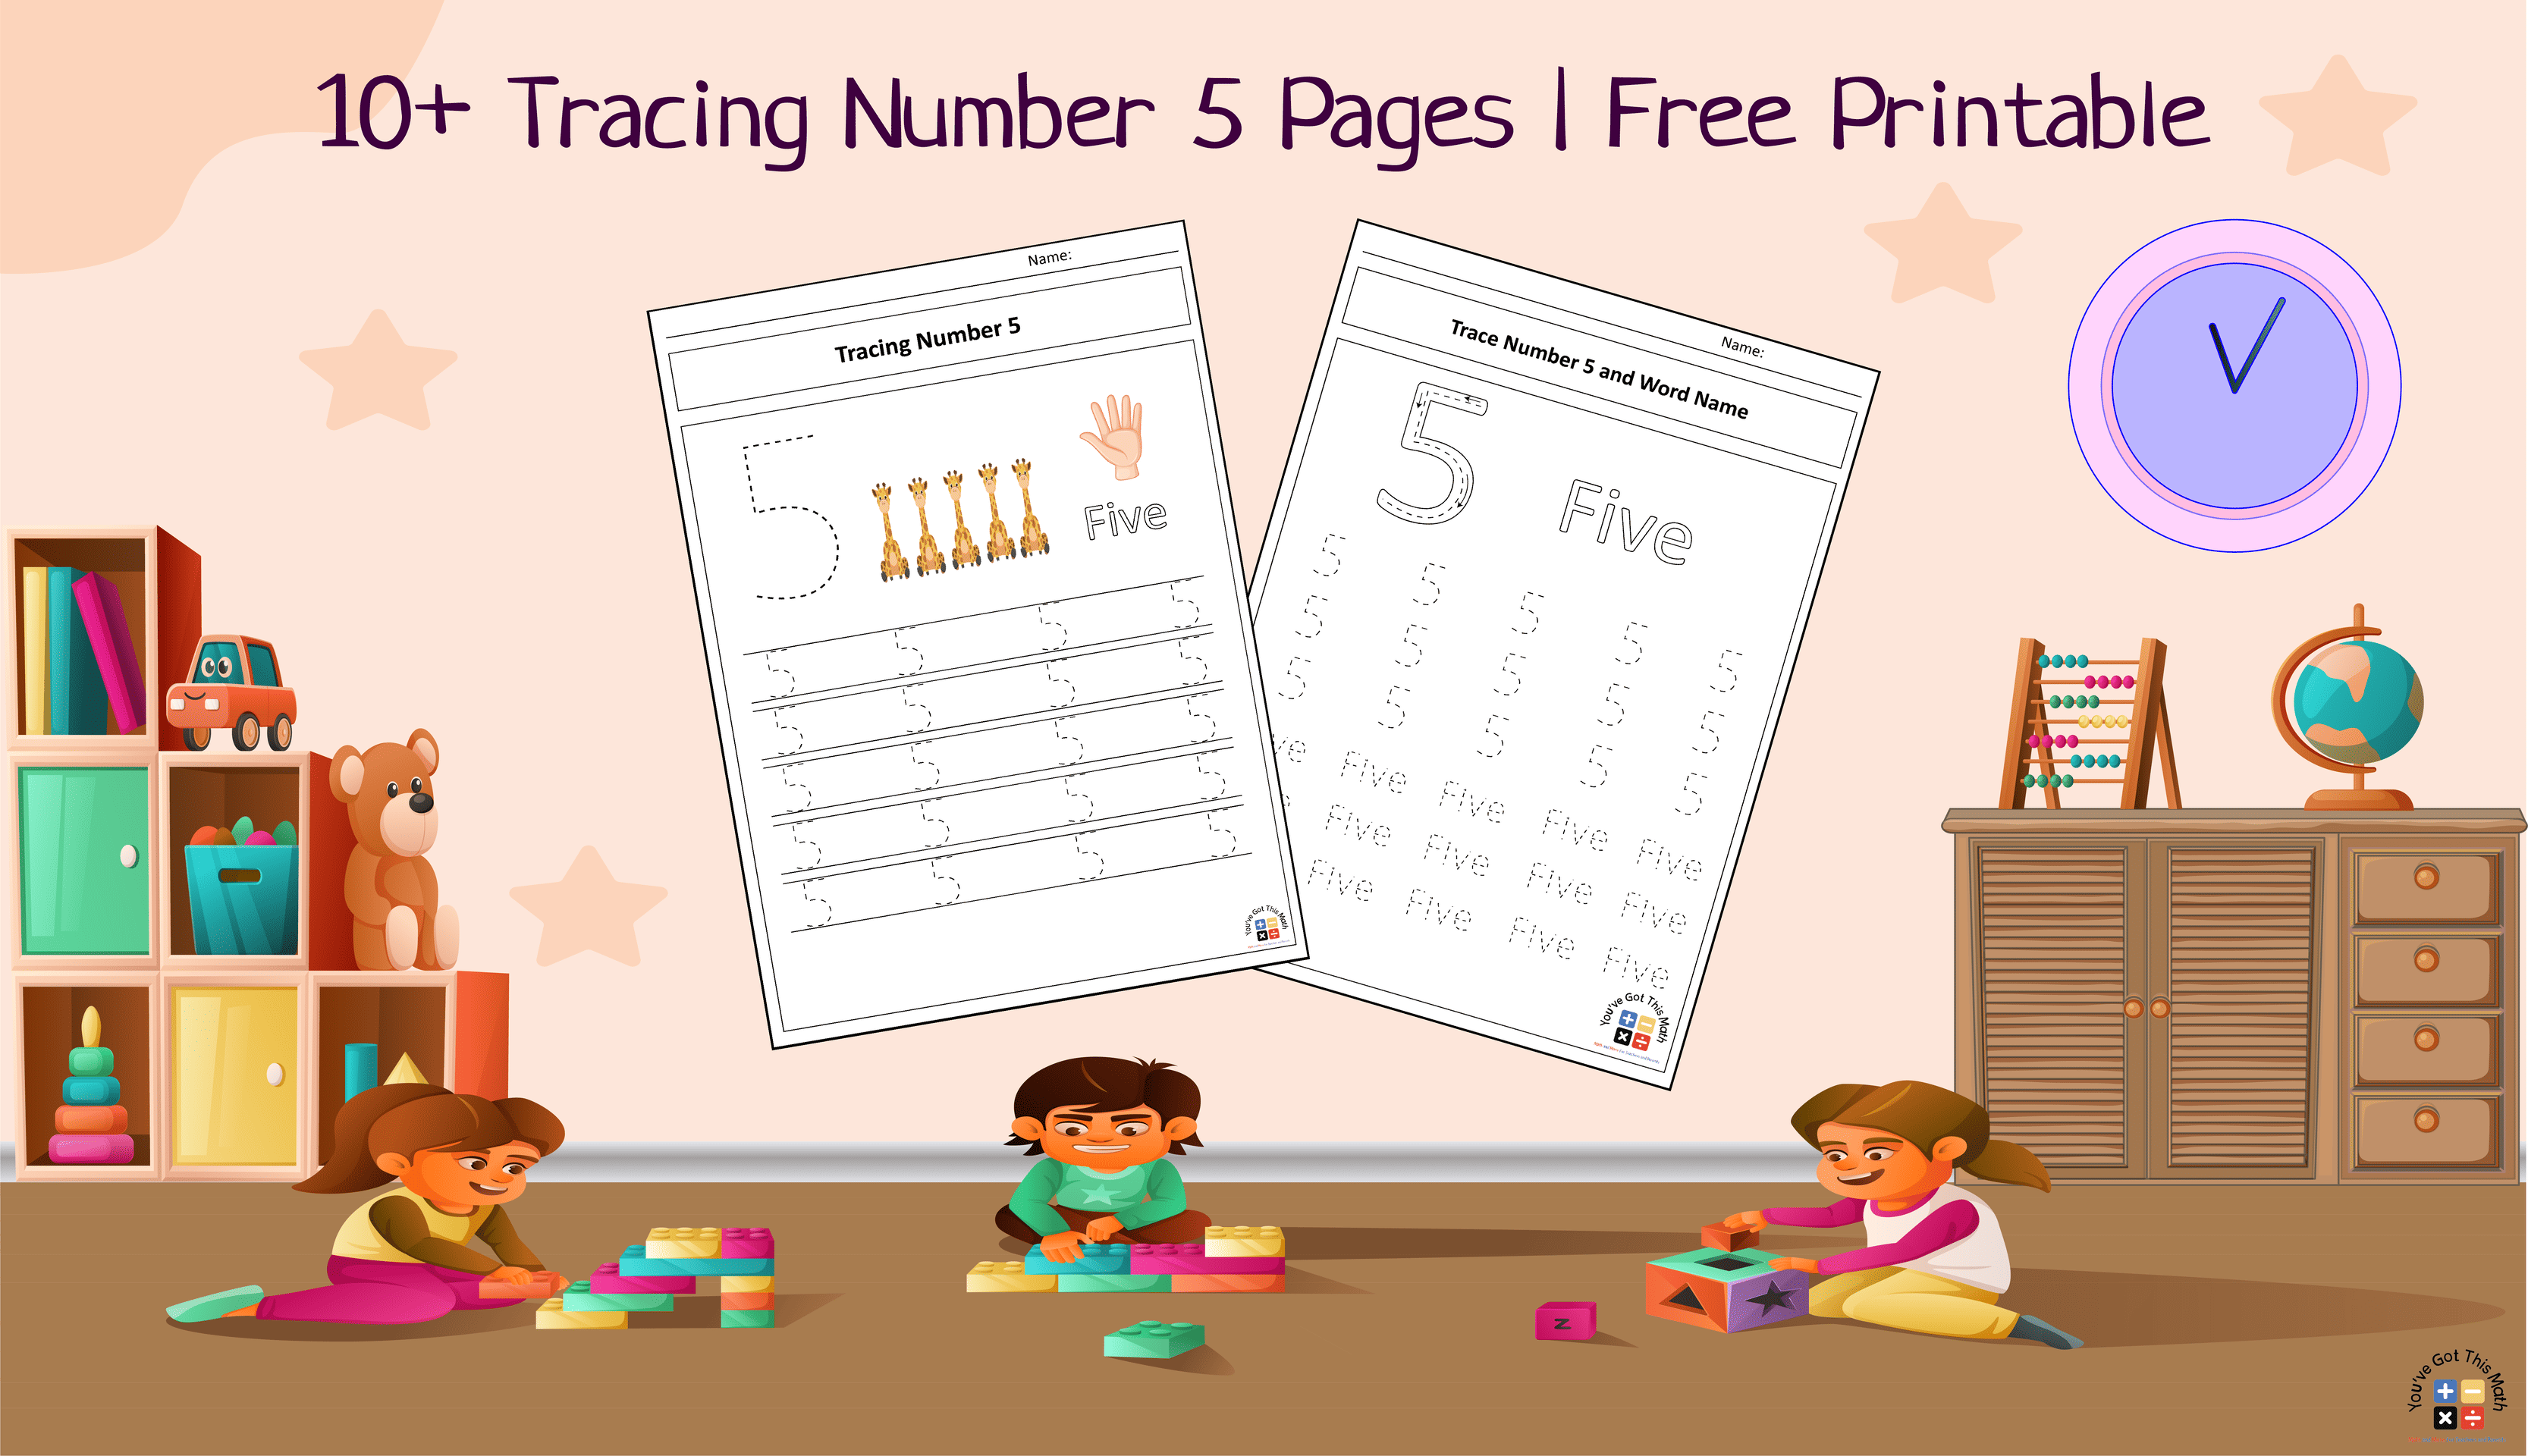 10+ Tracing Number 5 Pages | Free Printable